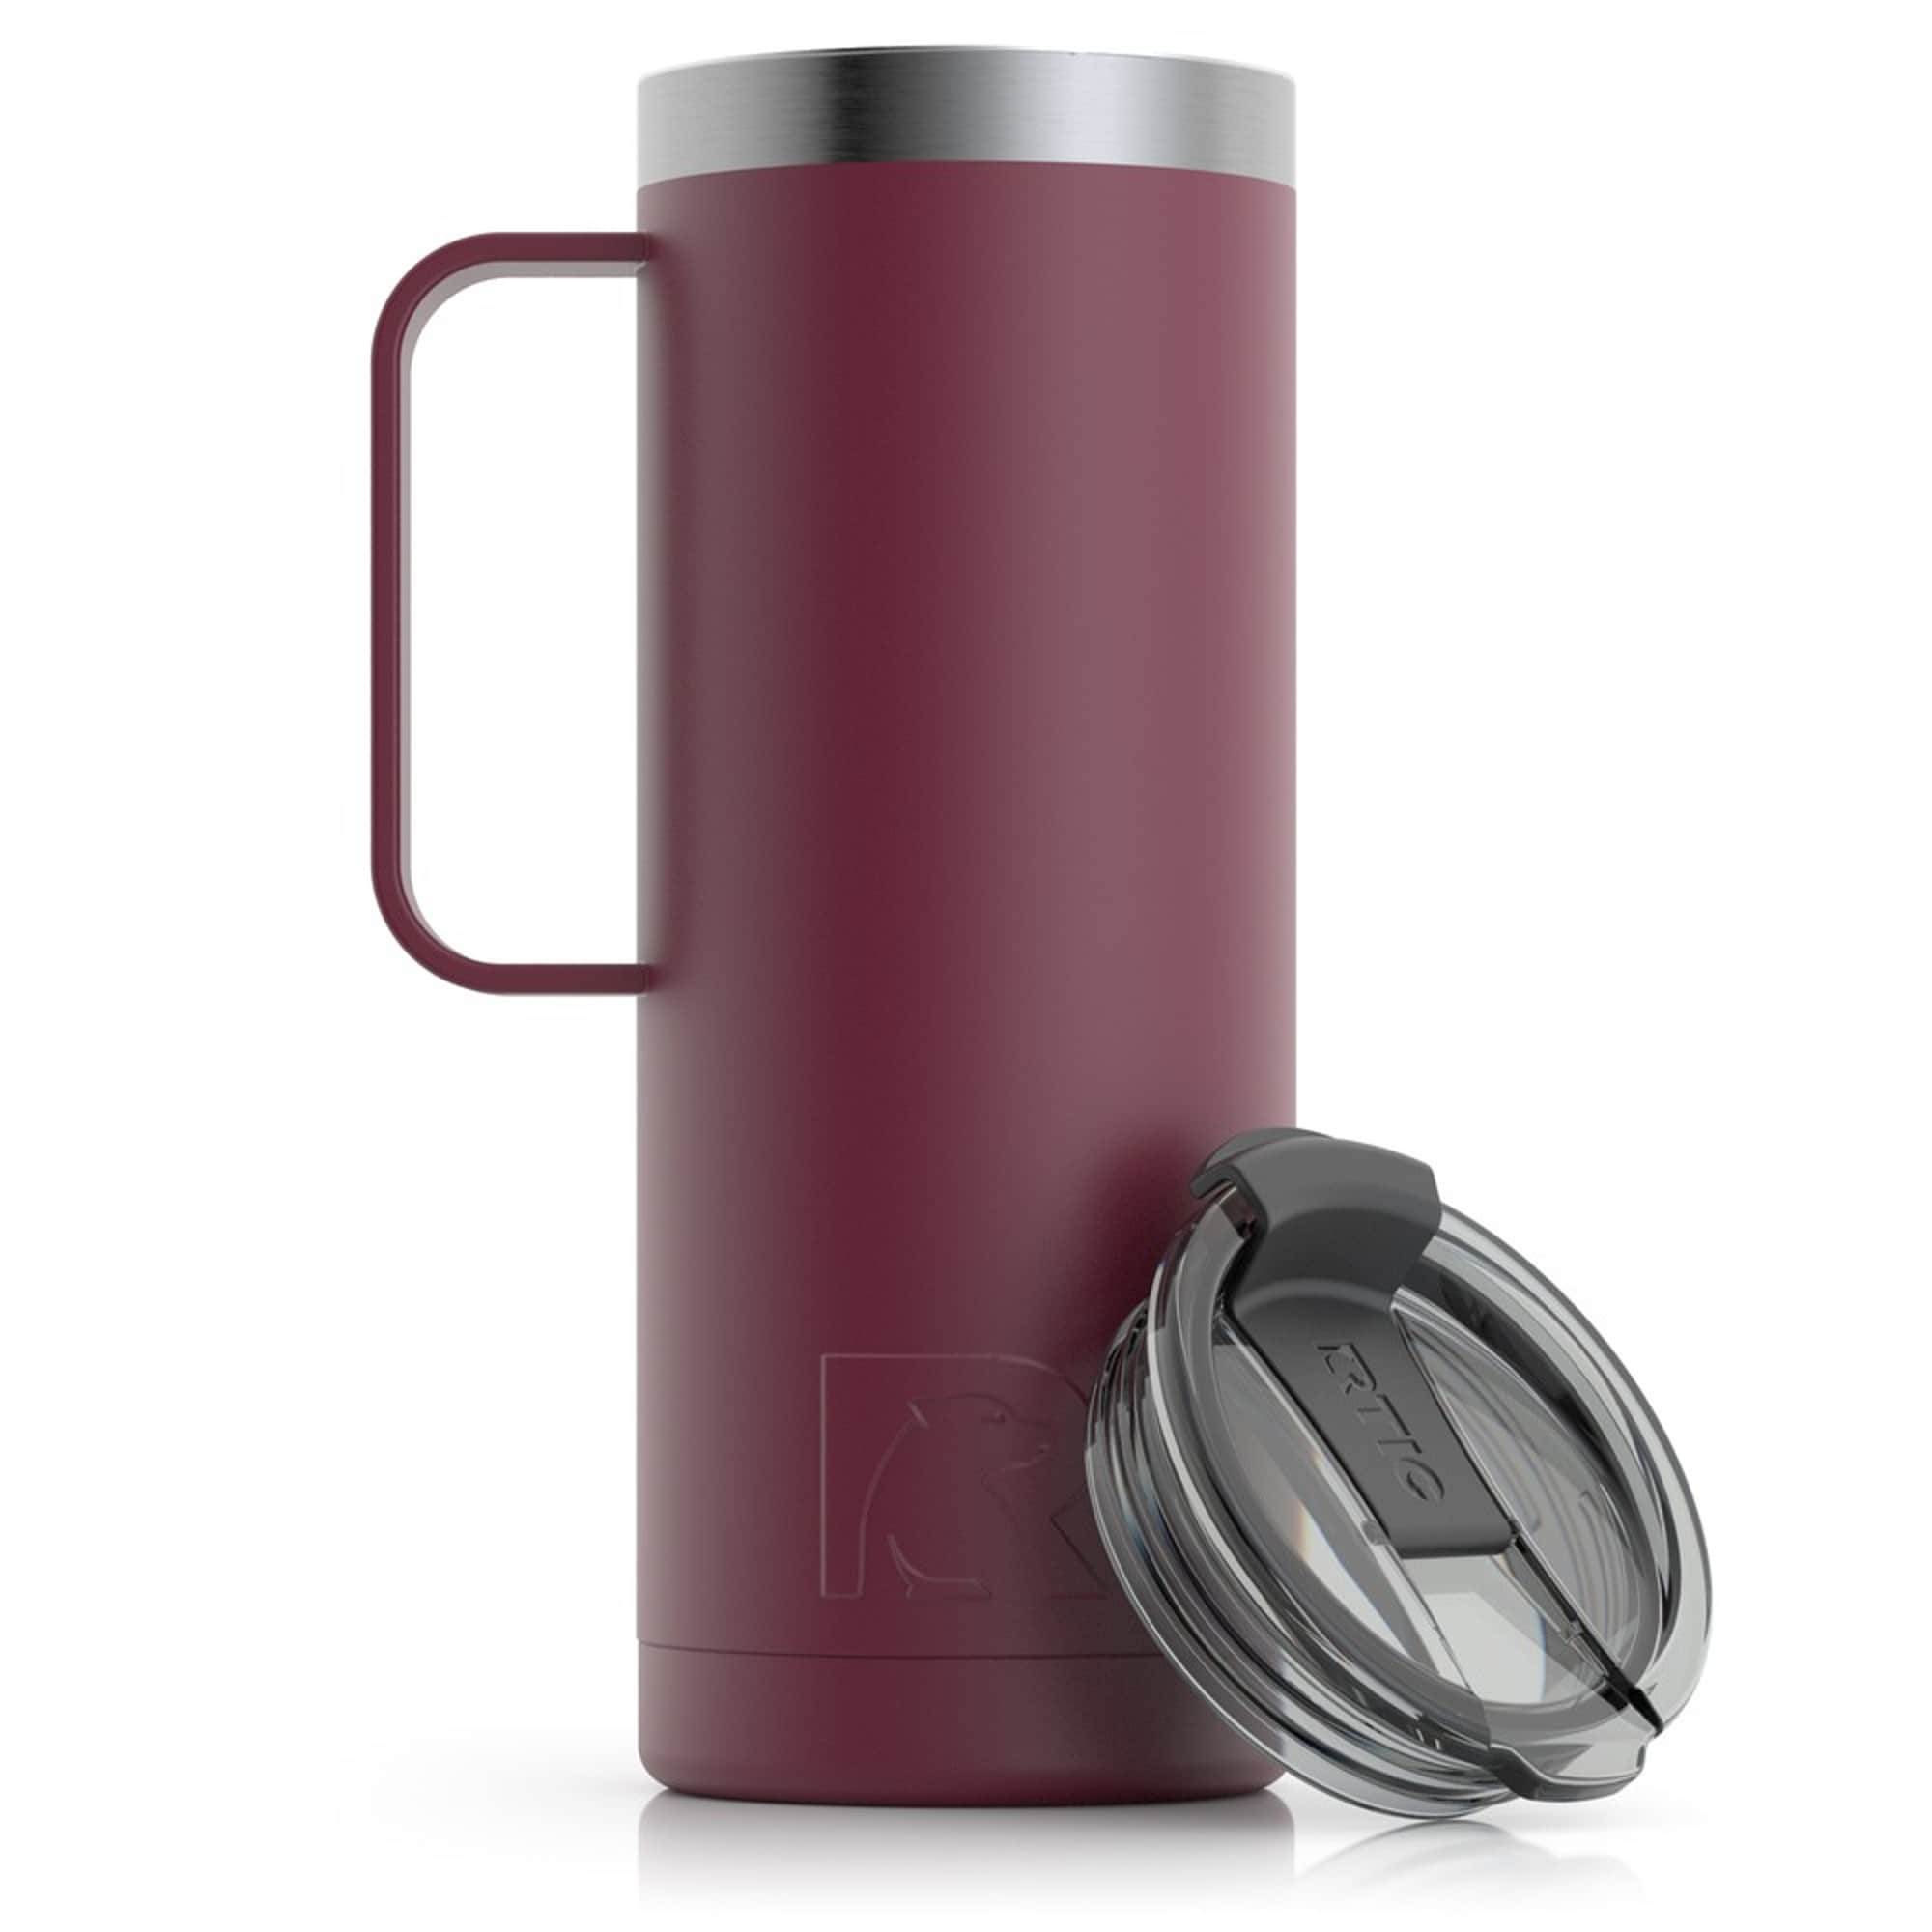 Mug Stainless Steel 16 Oz, Tumblers, Thermos, Cups, Glass, Bottle